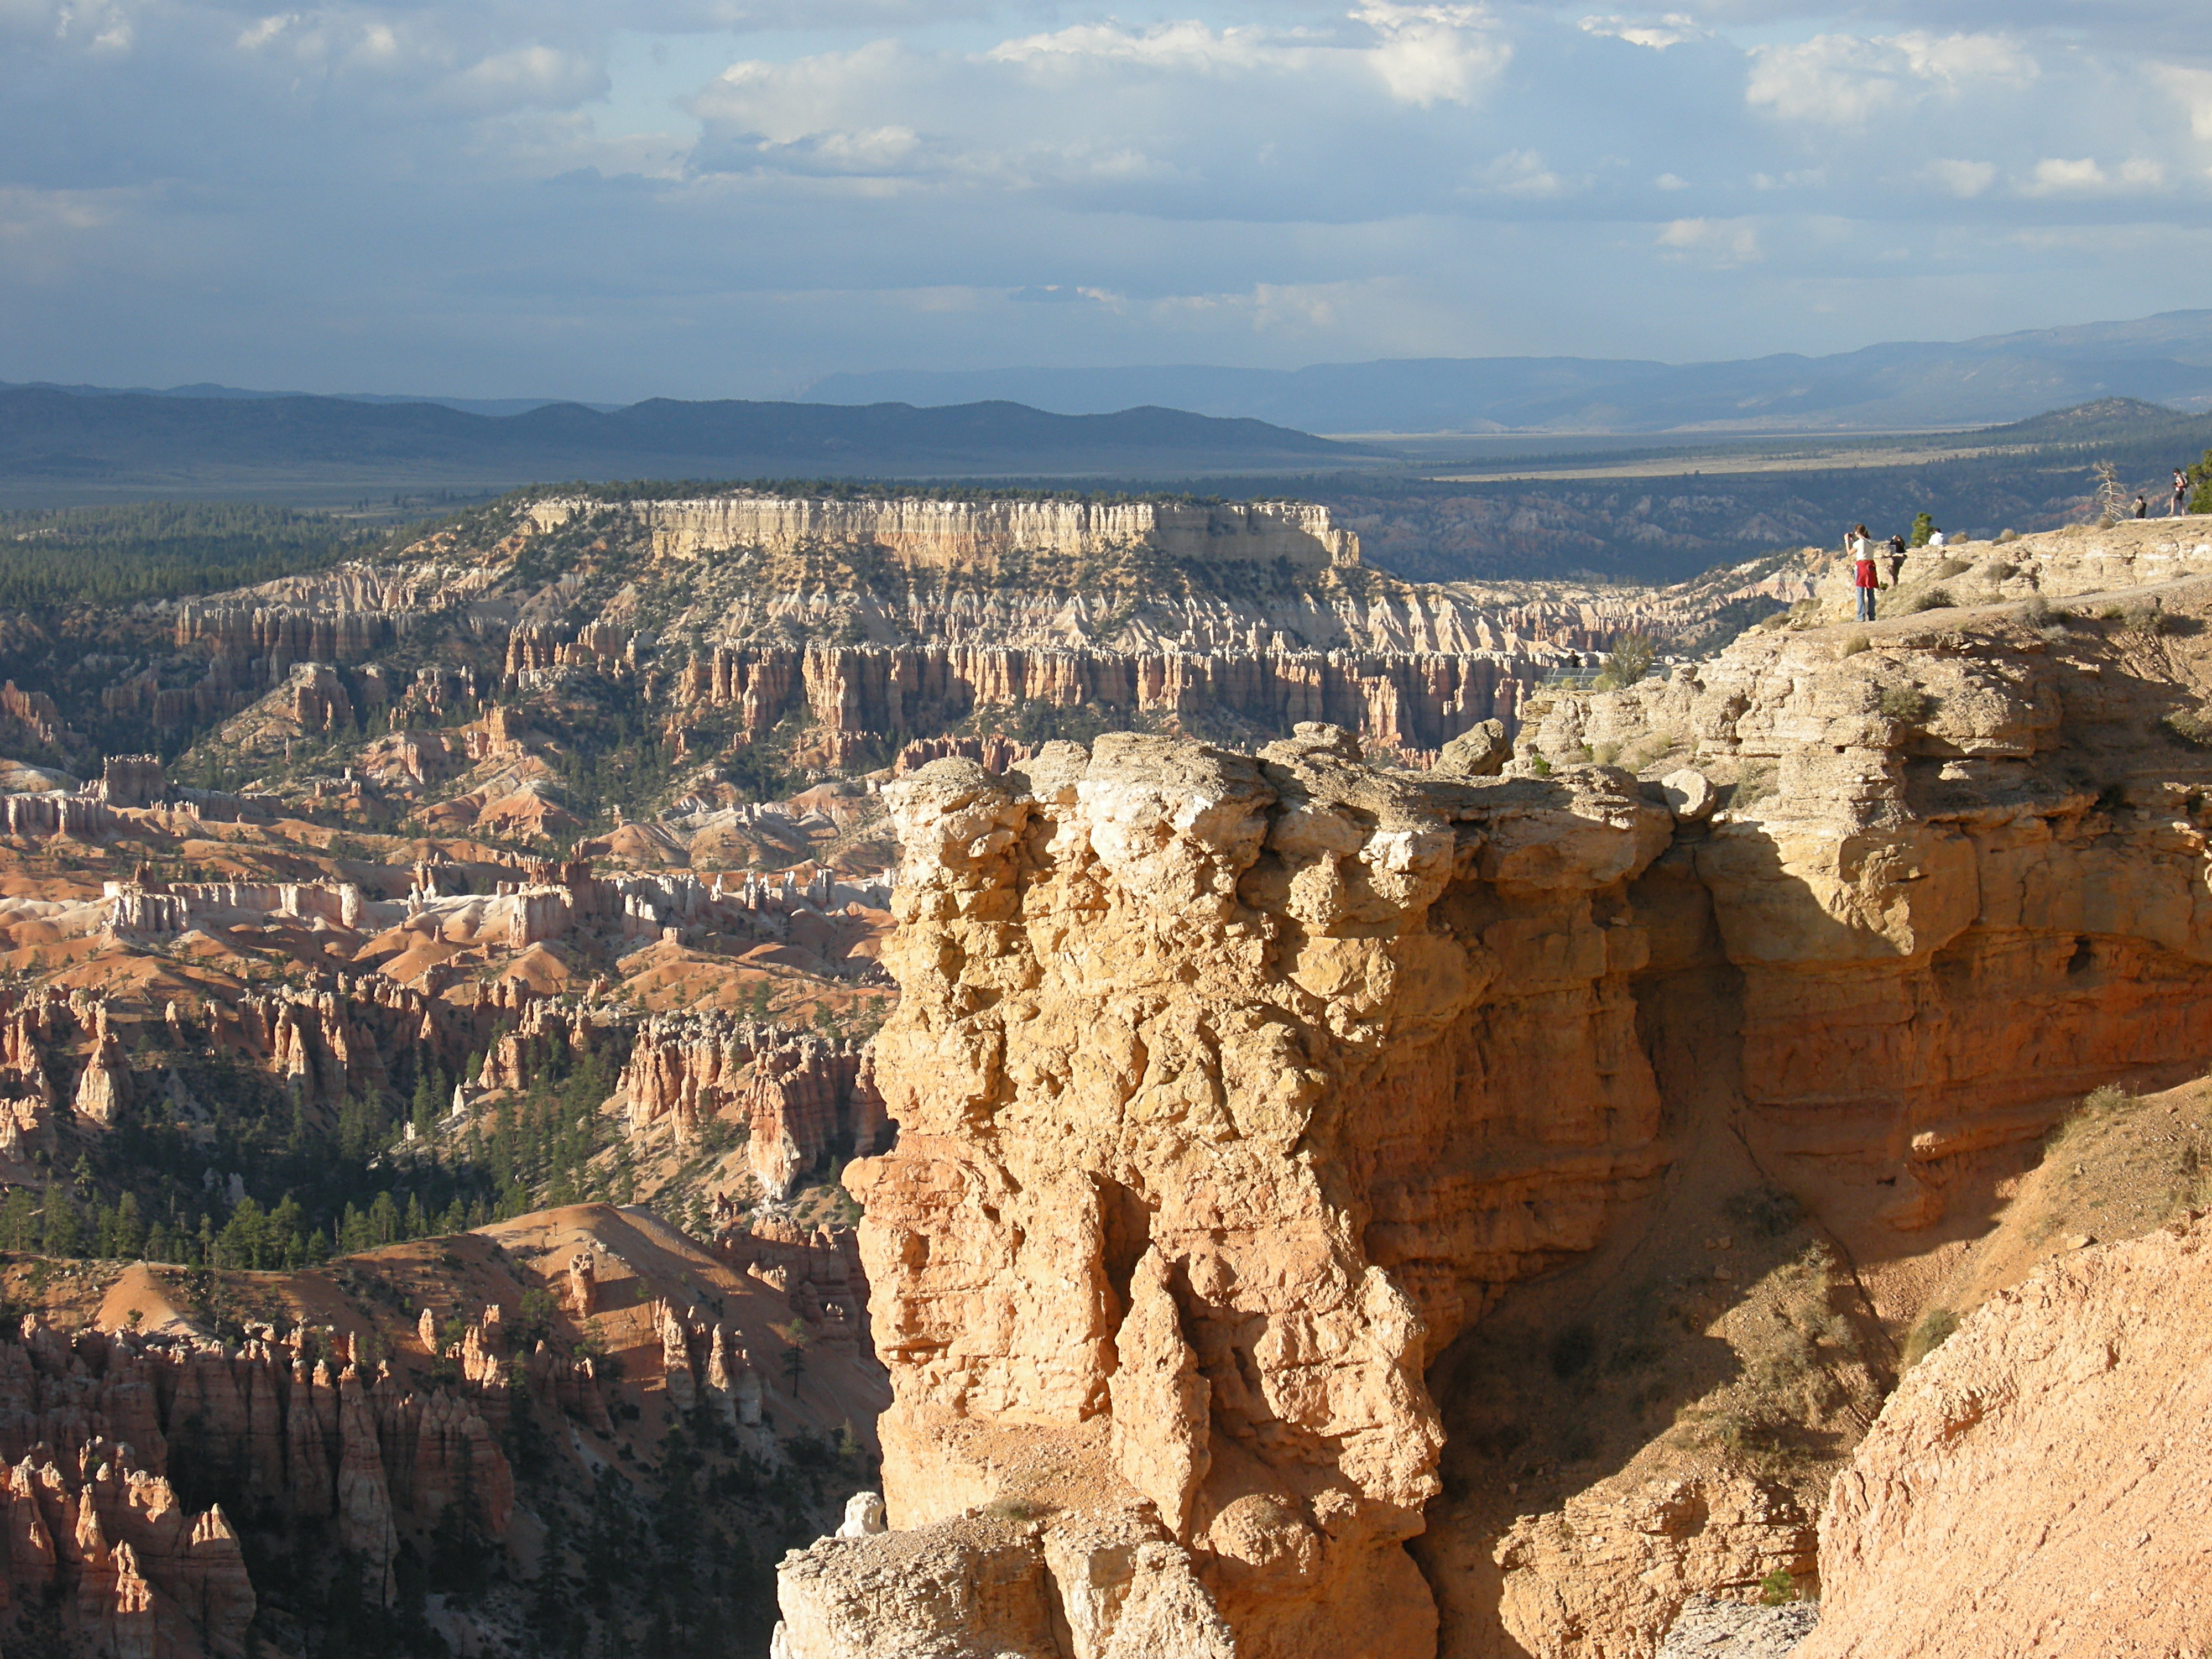 Looking back towards Bryce Point from the Rim Trail